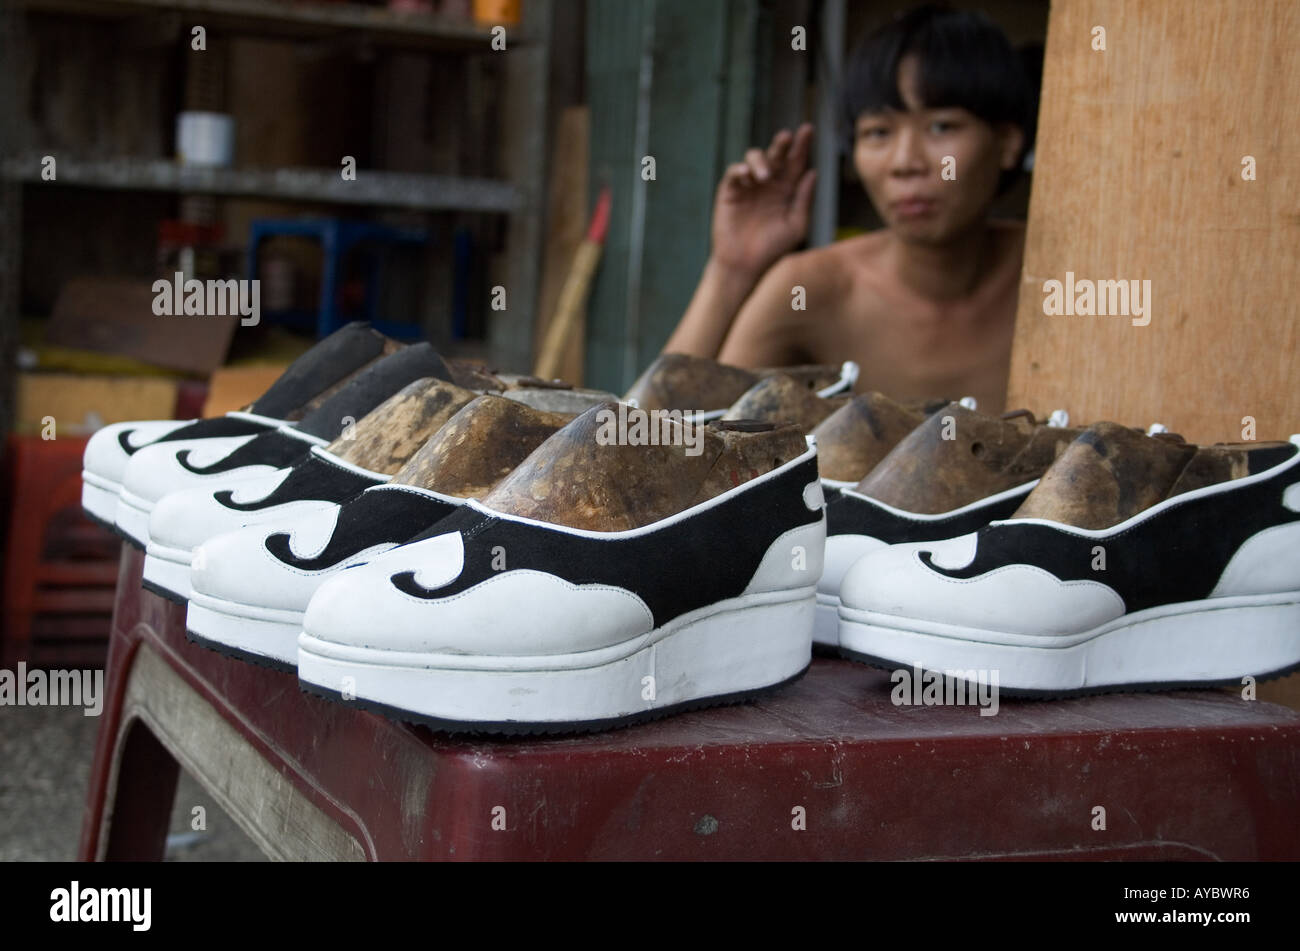 The young shoemaker selling his platform style shoes on the Bui Vien street in the backpacker area of Pham Ngu Loa, Vietnam, Jul Stock Photo